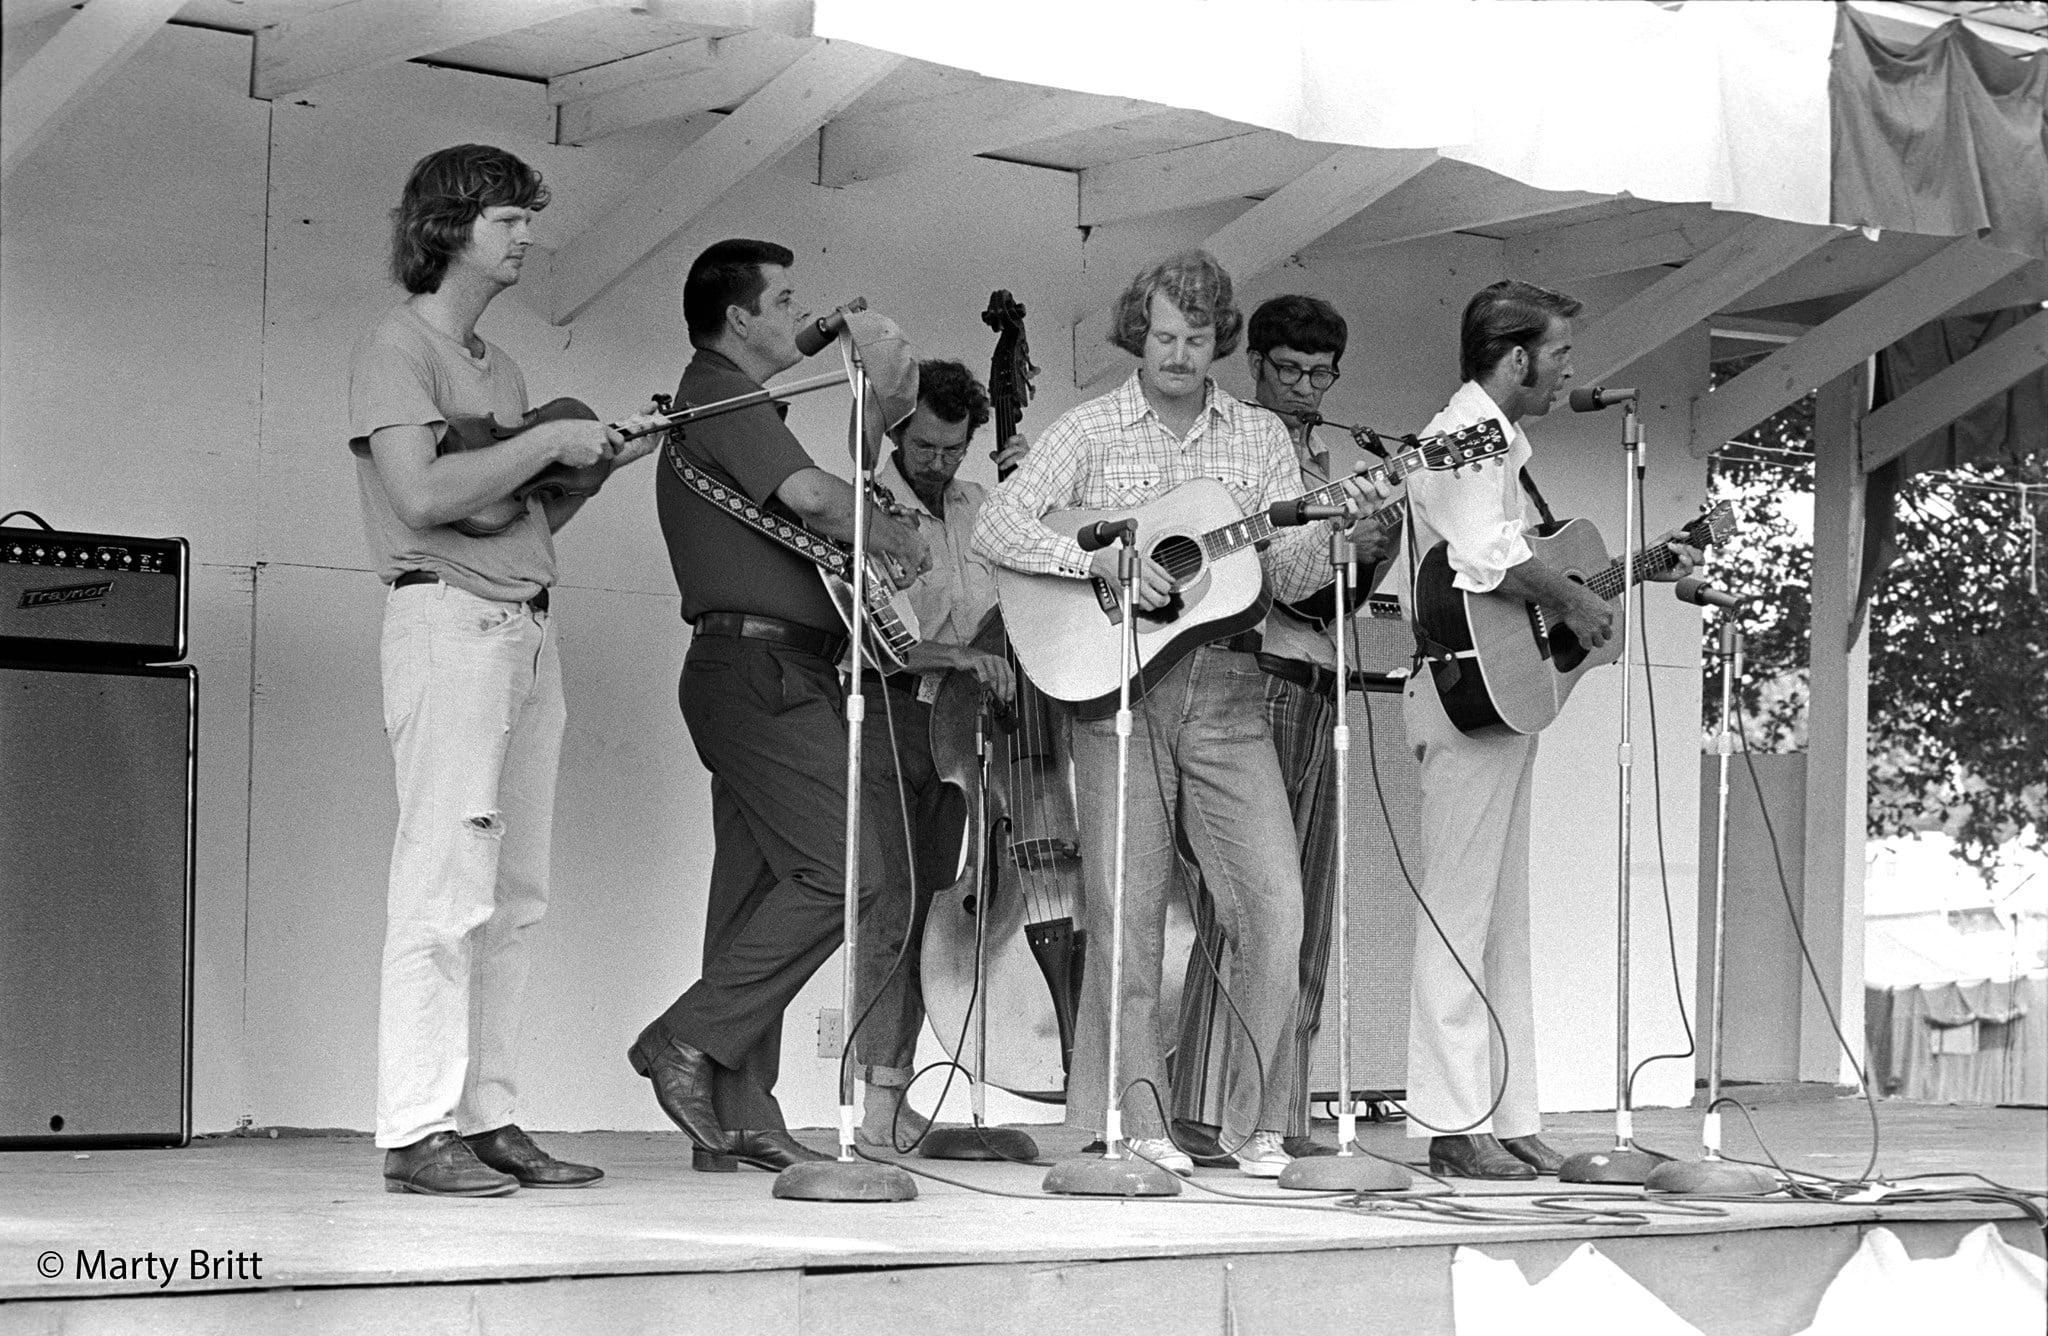 The band The Bluegrass Experience was active in the Triangle area of the Piedmont from 1971 until bandleader Tommy Edwards death in 2021. Members also included Snuffy Smith, Charles Lee Conard, and "Fiddlin' Al" McCanless. The band is perhaps best known for playing The Cat's Cradle every Thursday from 1972-1981. Many friendships were fomed on those nights.